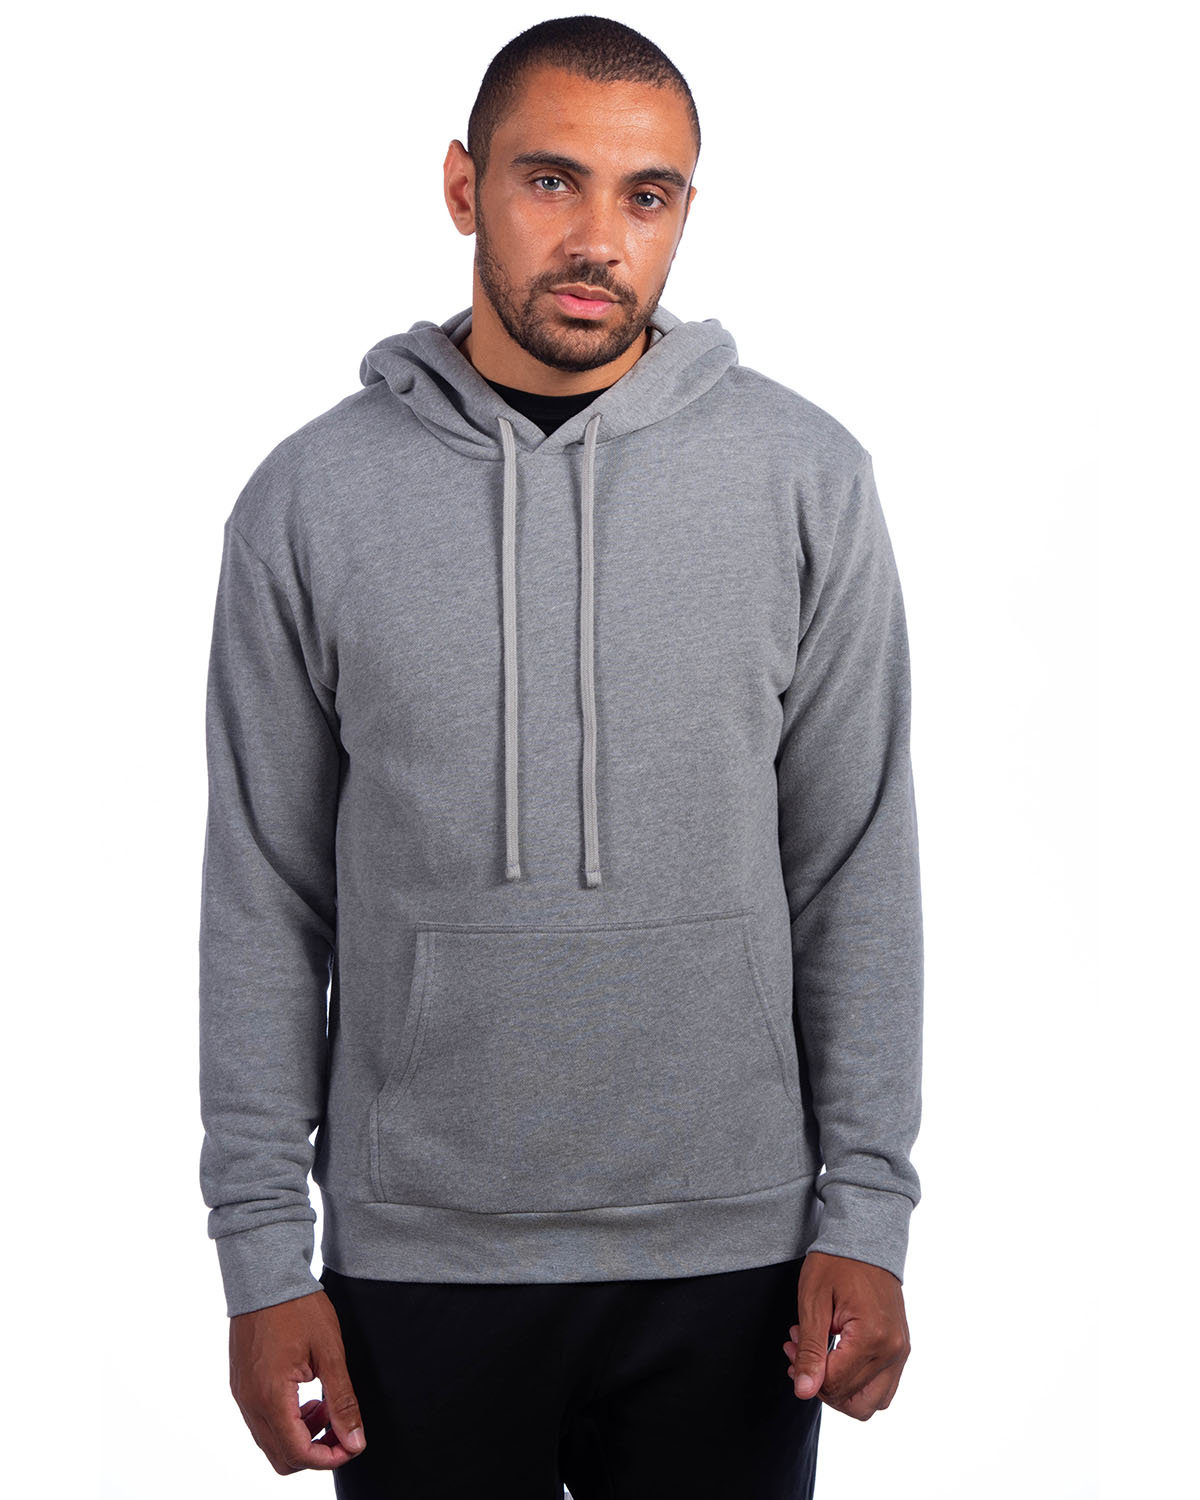 Next Level Adult Sueded French Terry Pullover Sweatshirt HEATHER GRAY 